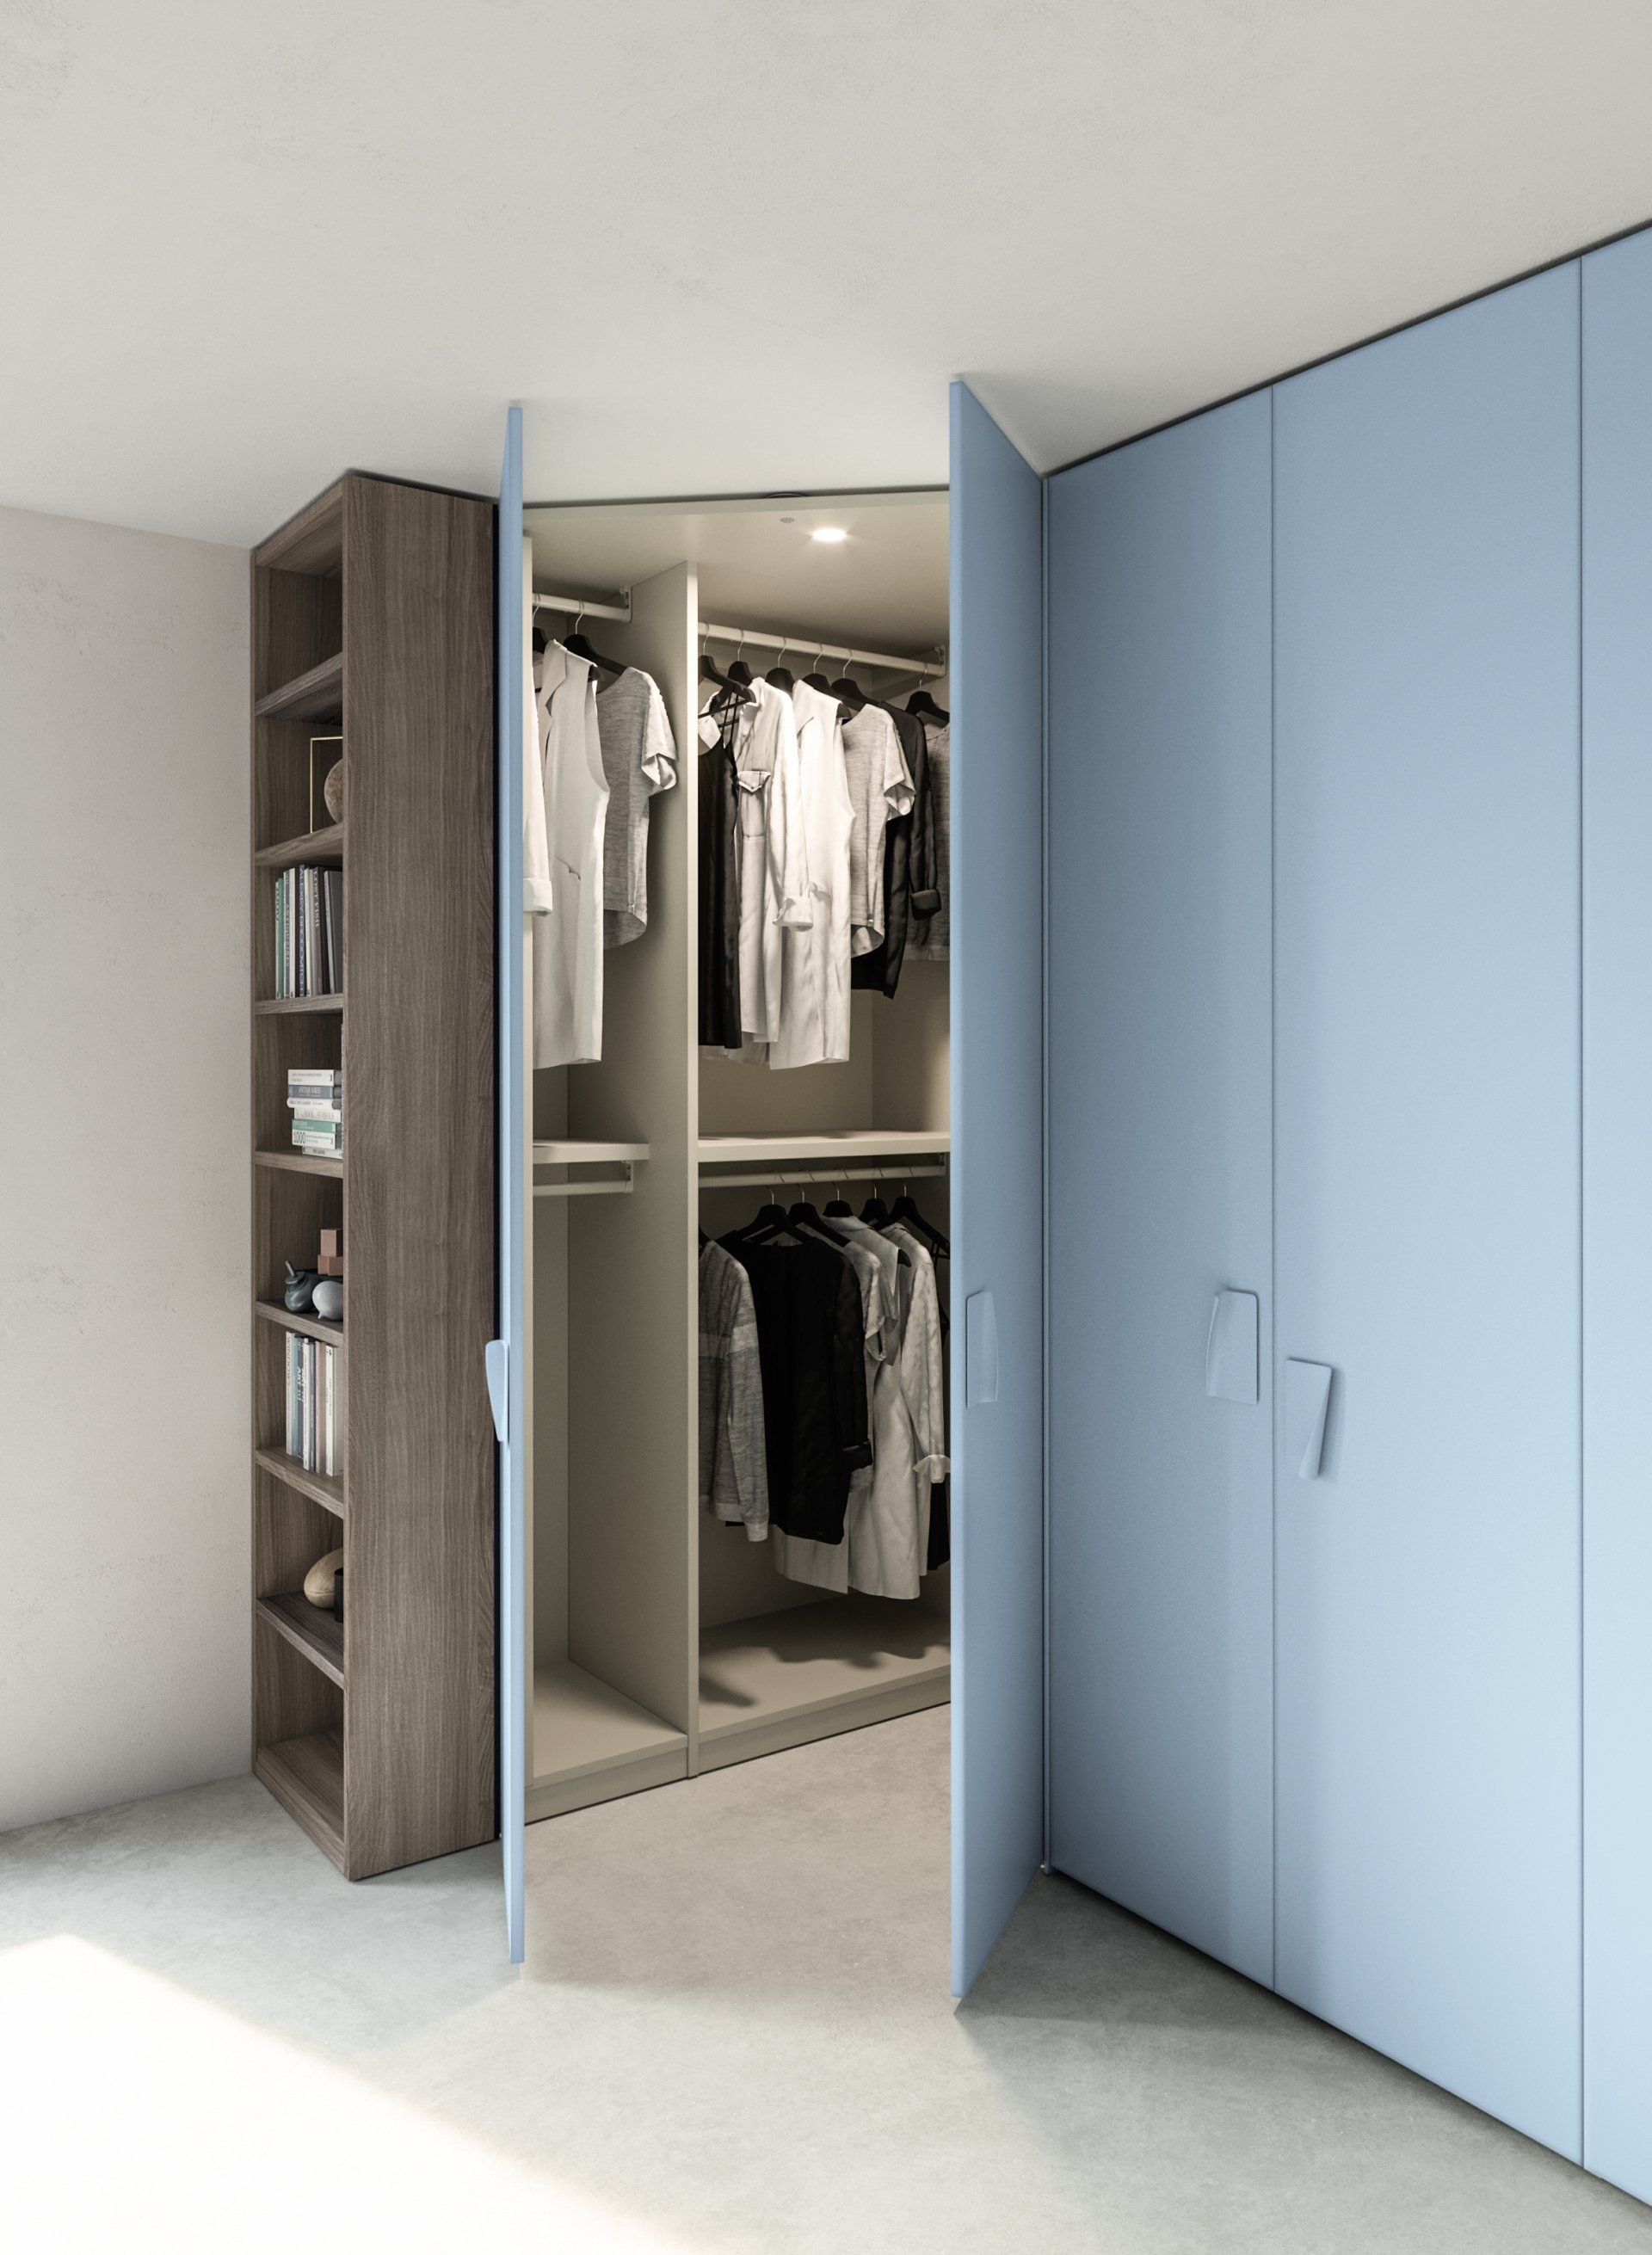 Dressing room, walking wardrobe. Bespoke dressing room, accessories organiser island and slightly tinted glass doors to display the lighting and clever storage